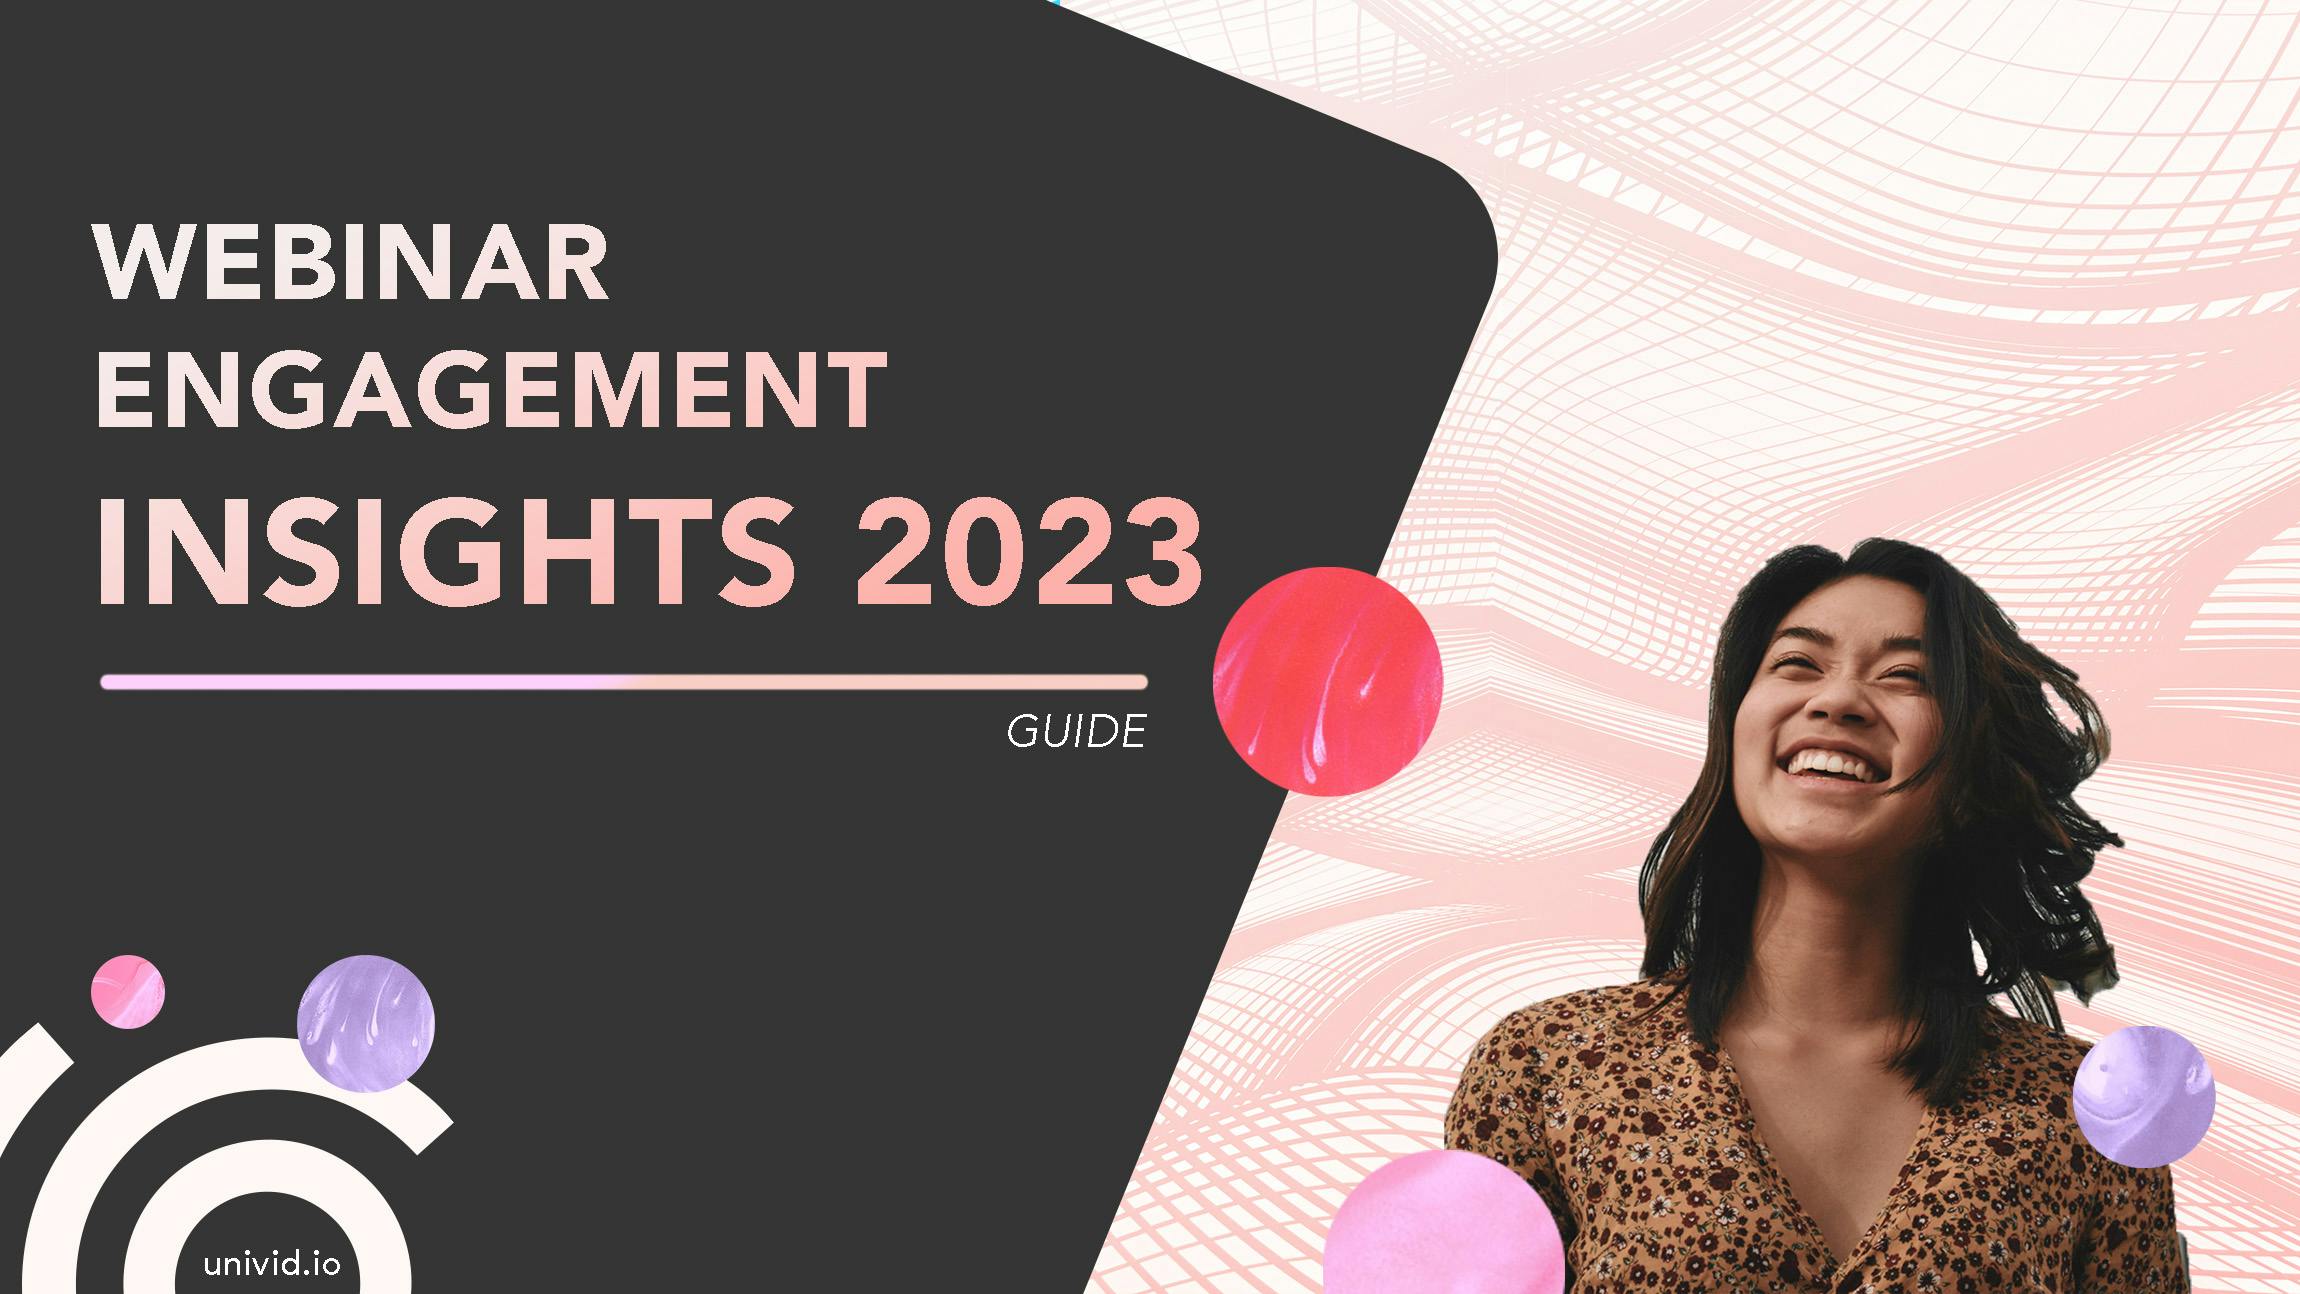 Want to maximize the impact of your webinar efforts? Here are Univid's Webinar Engagement Insights 2023. The 6 best engagement tips, based on thousands of webinars.